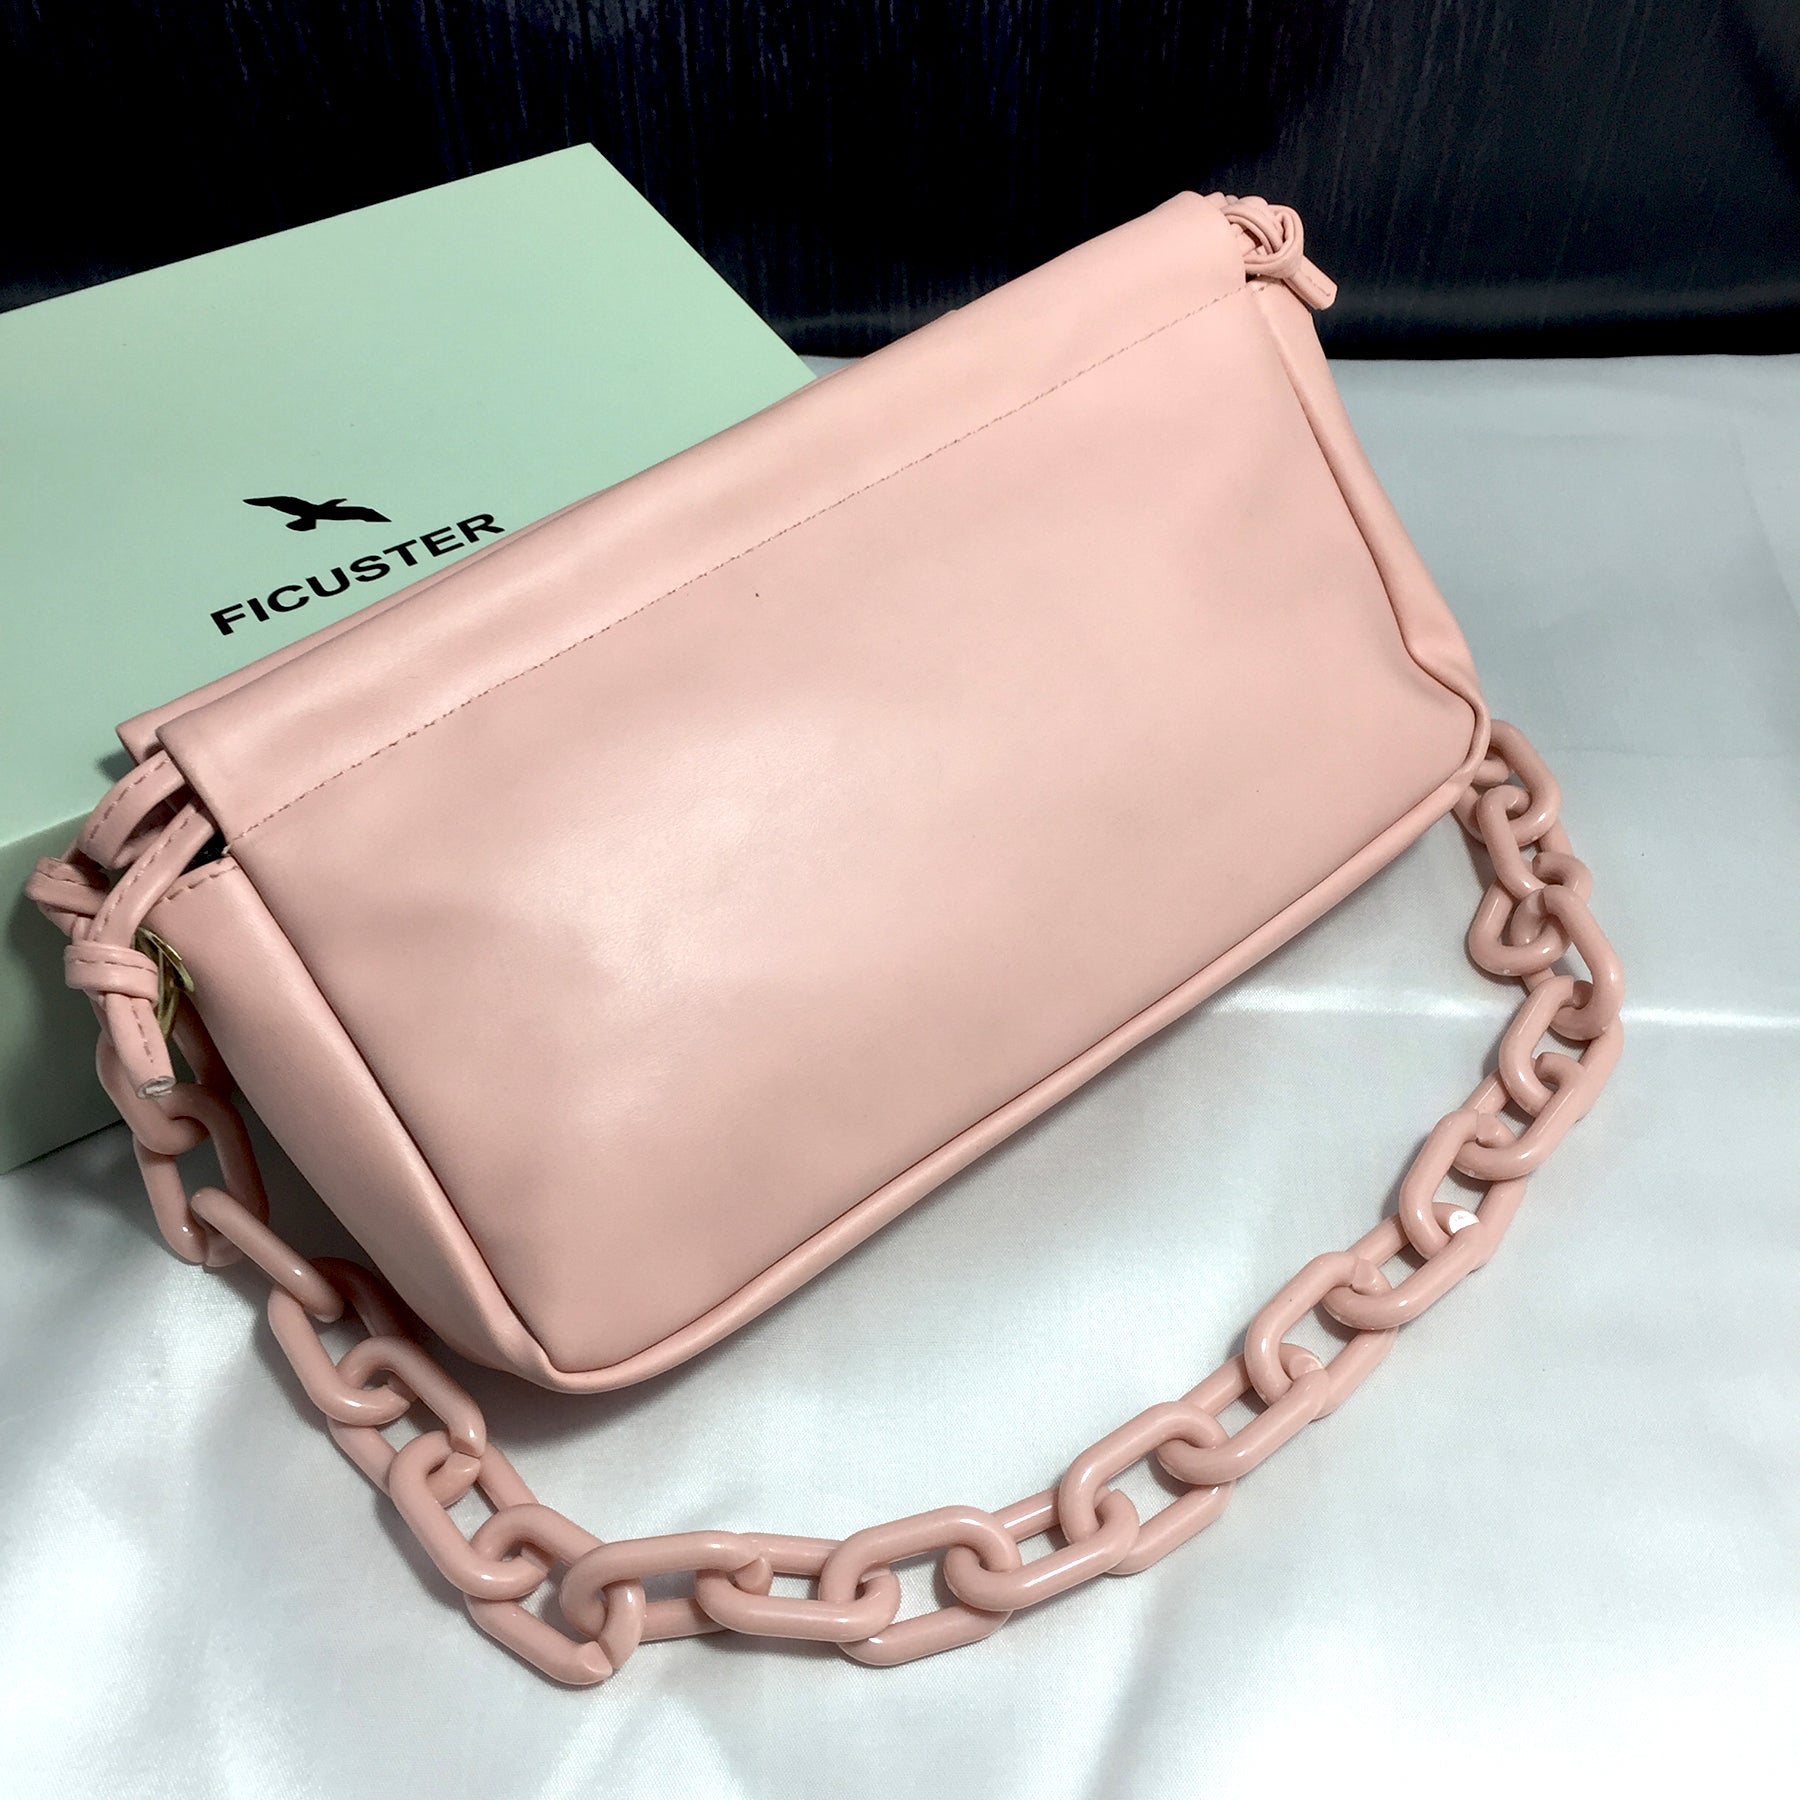 Ficuster Solid Peach Sling Bag